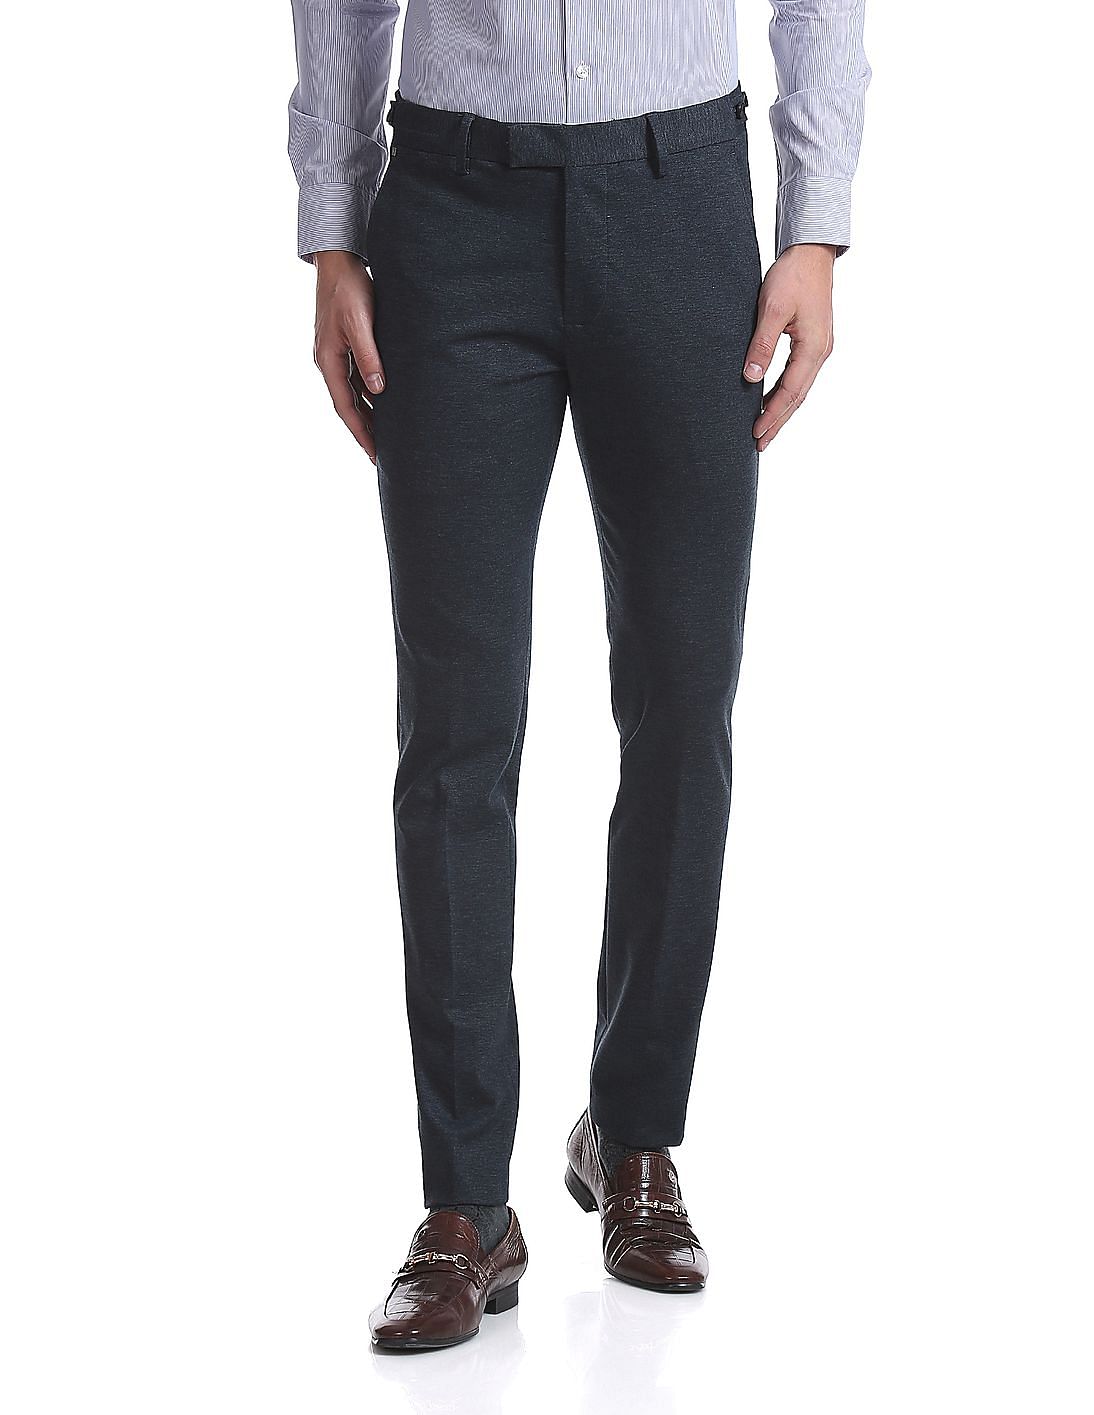 Buy USPA Tailored Men Super Slim Fit Solid Trousers - NNNOW.com